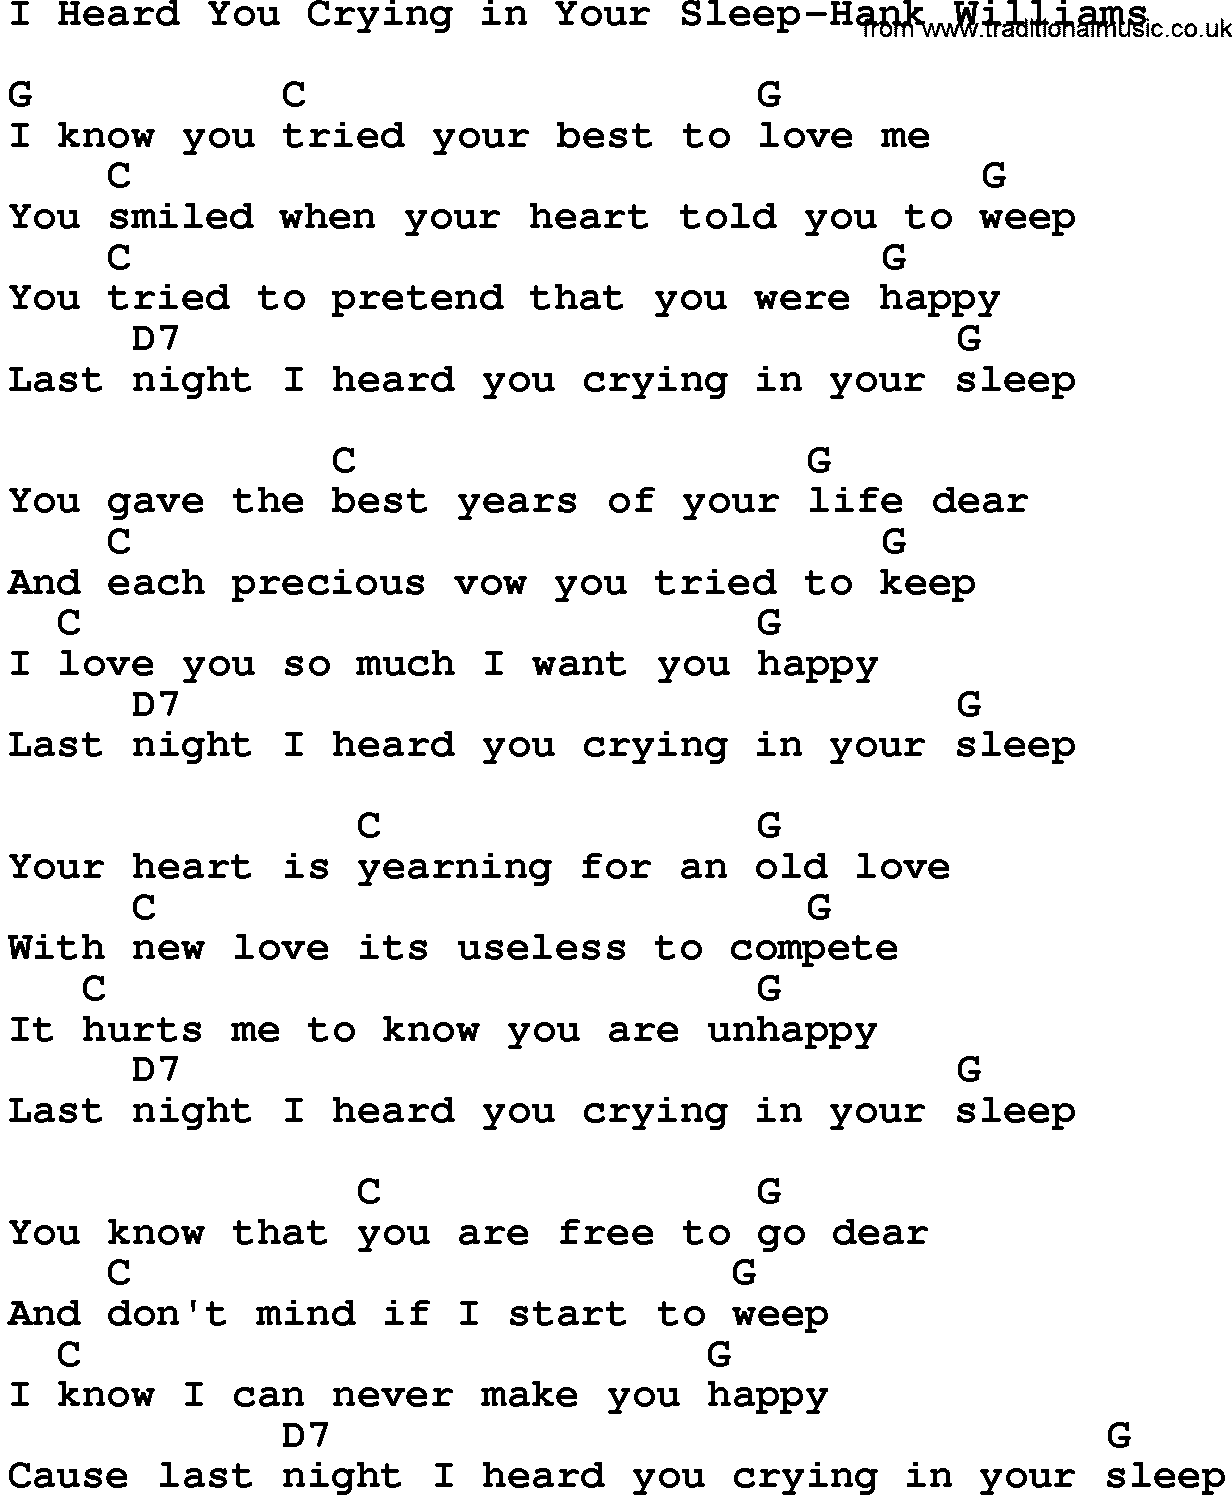 Country music song: I Heard You Crying In Your Sleep-Hank Williams lyrics and chords